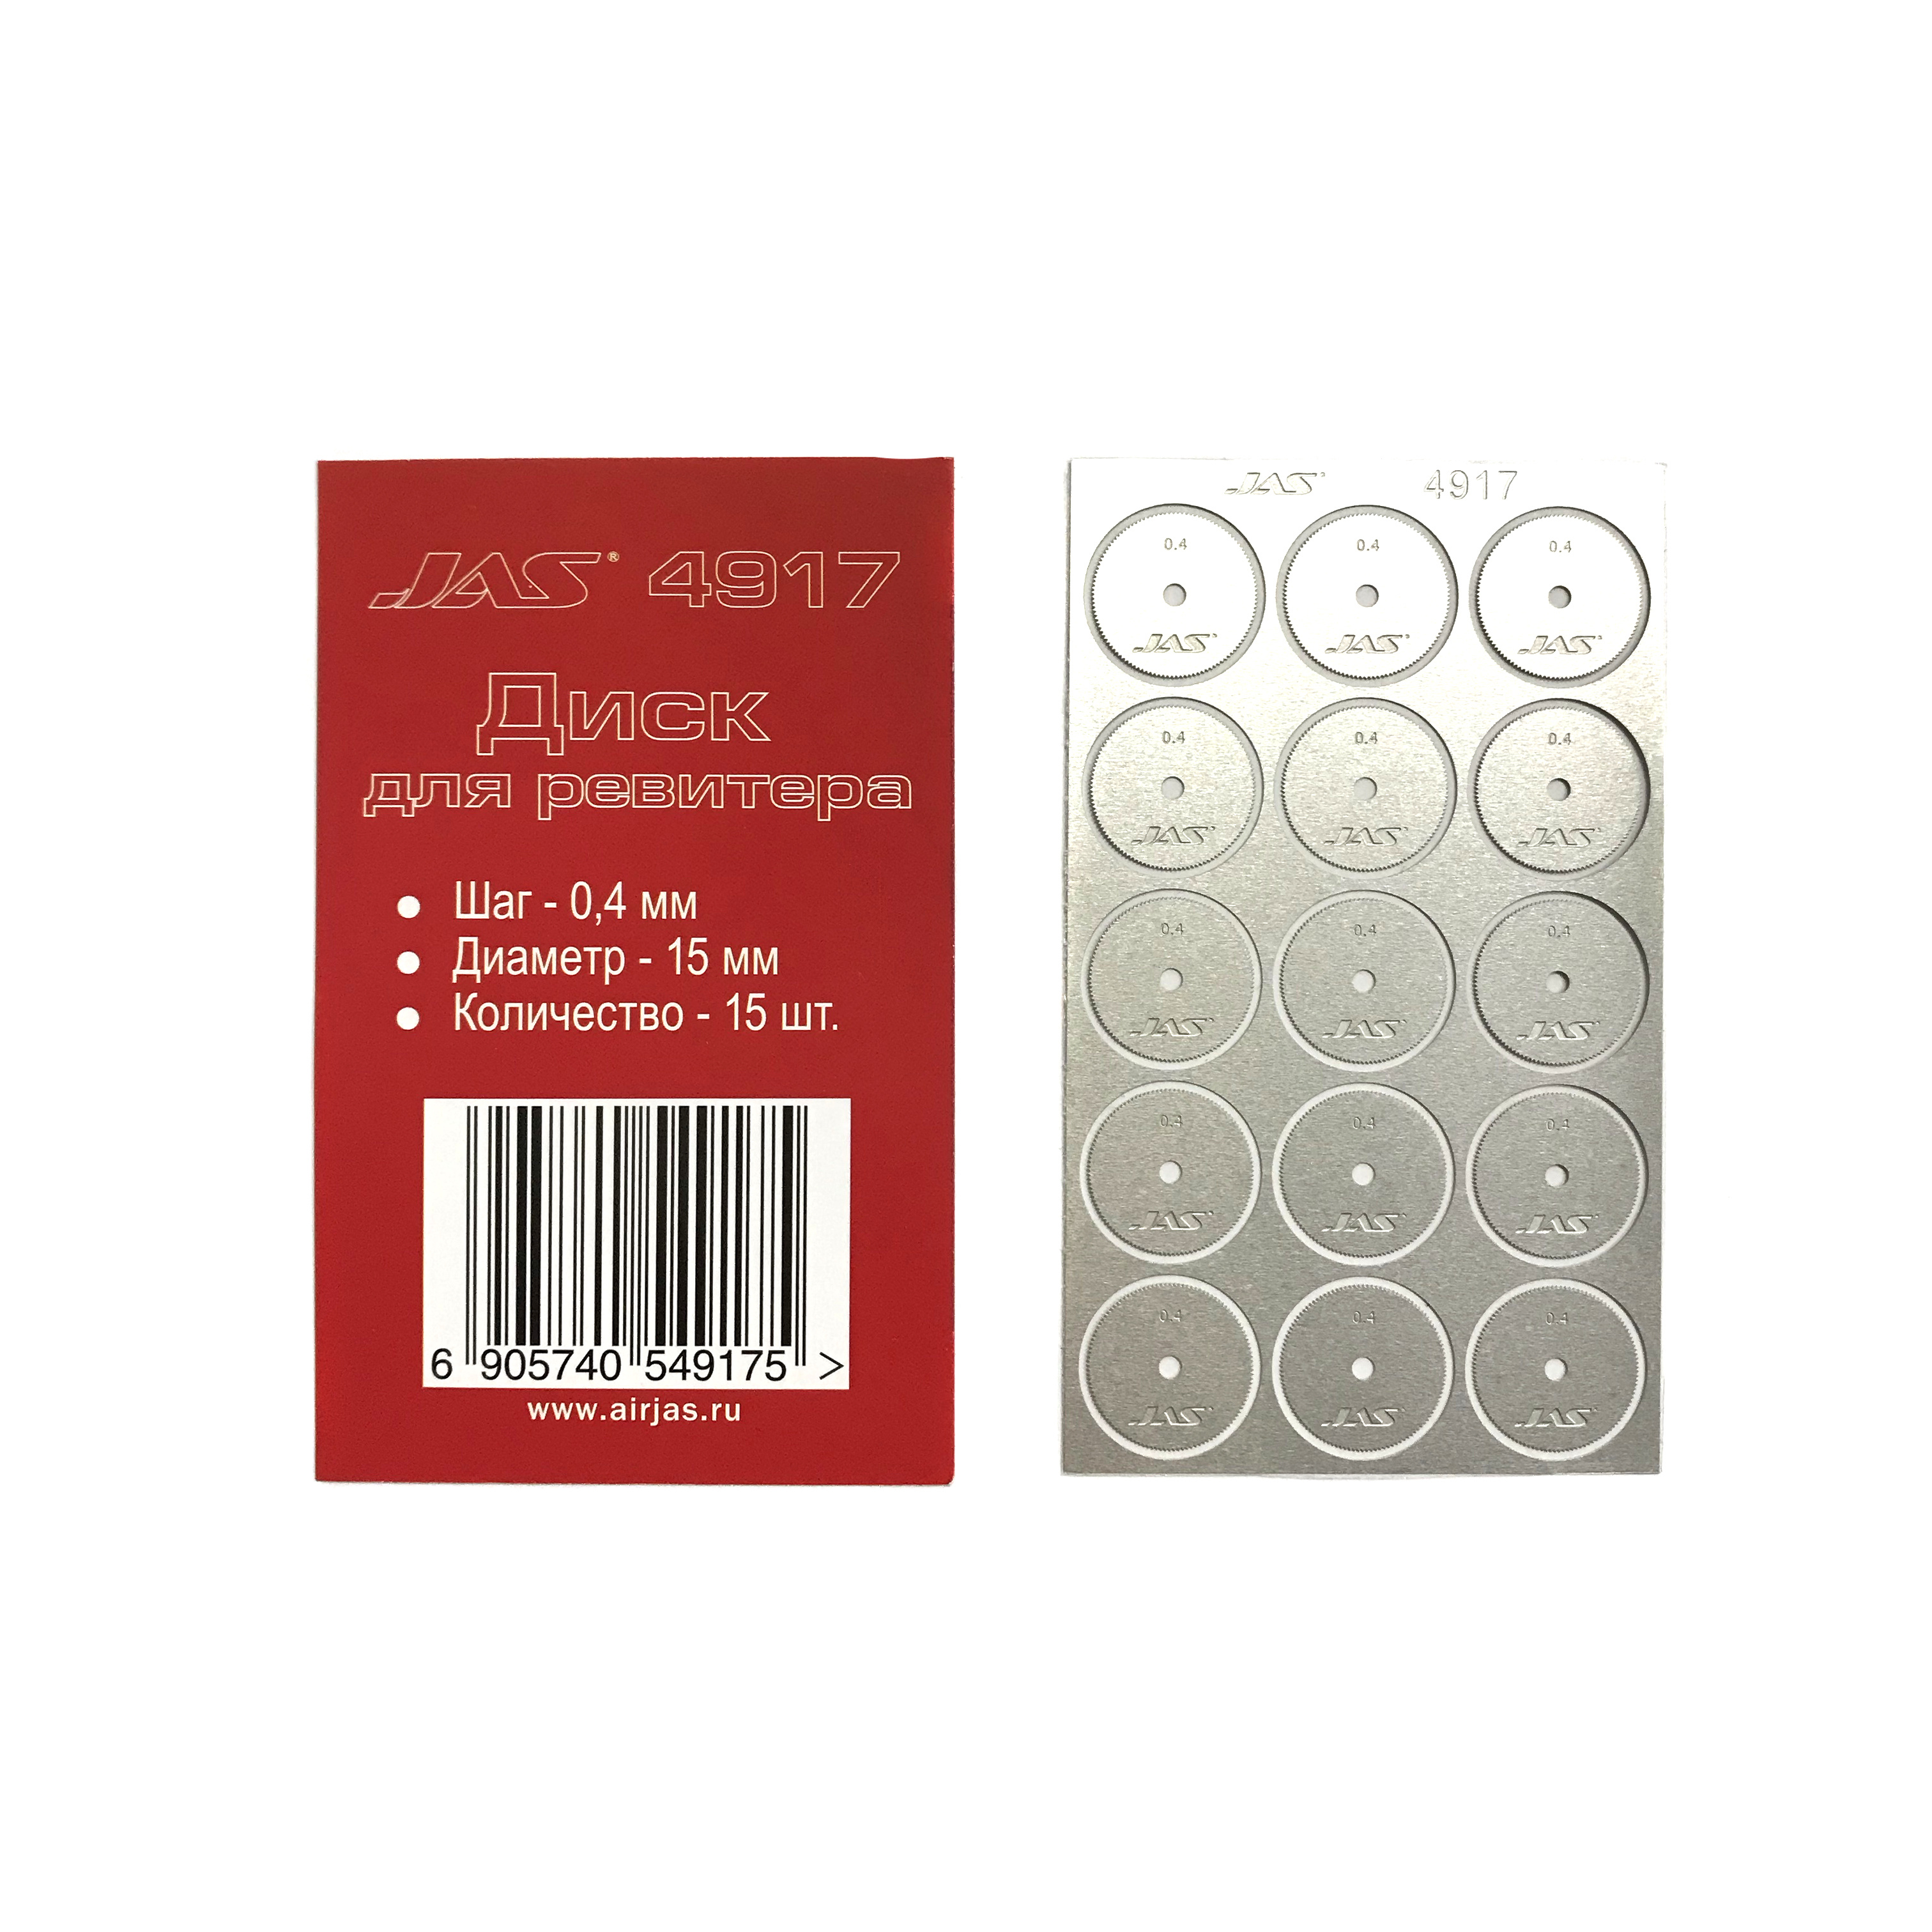 4917 JAS Disc for reviter d 15 mm, pitch 0.4 mm, 15 pieces.